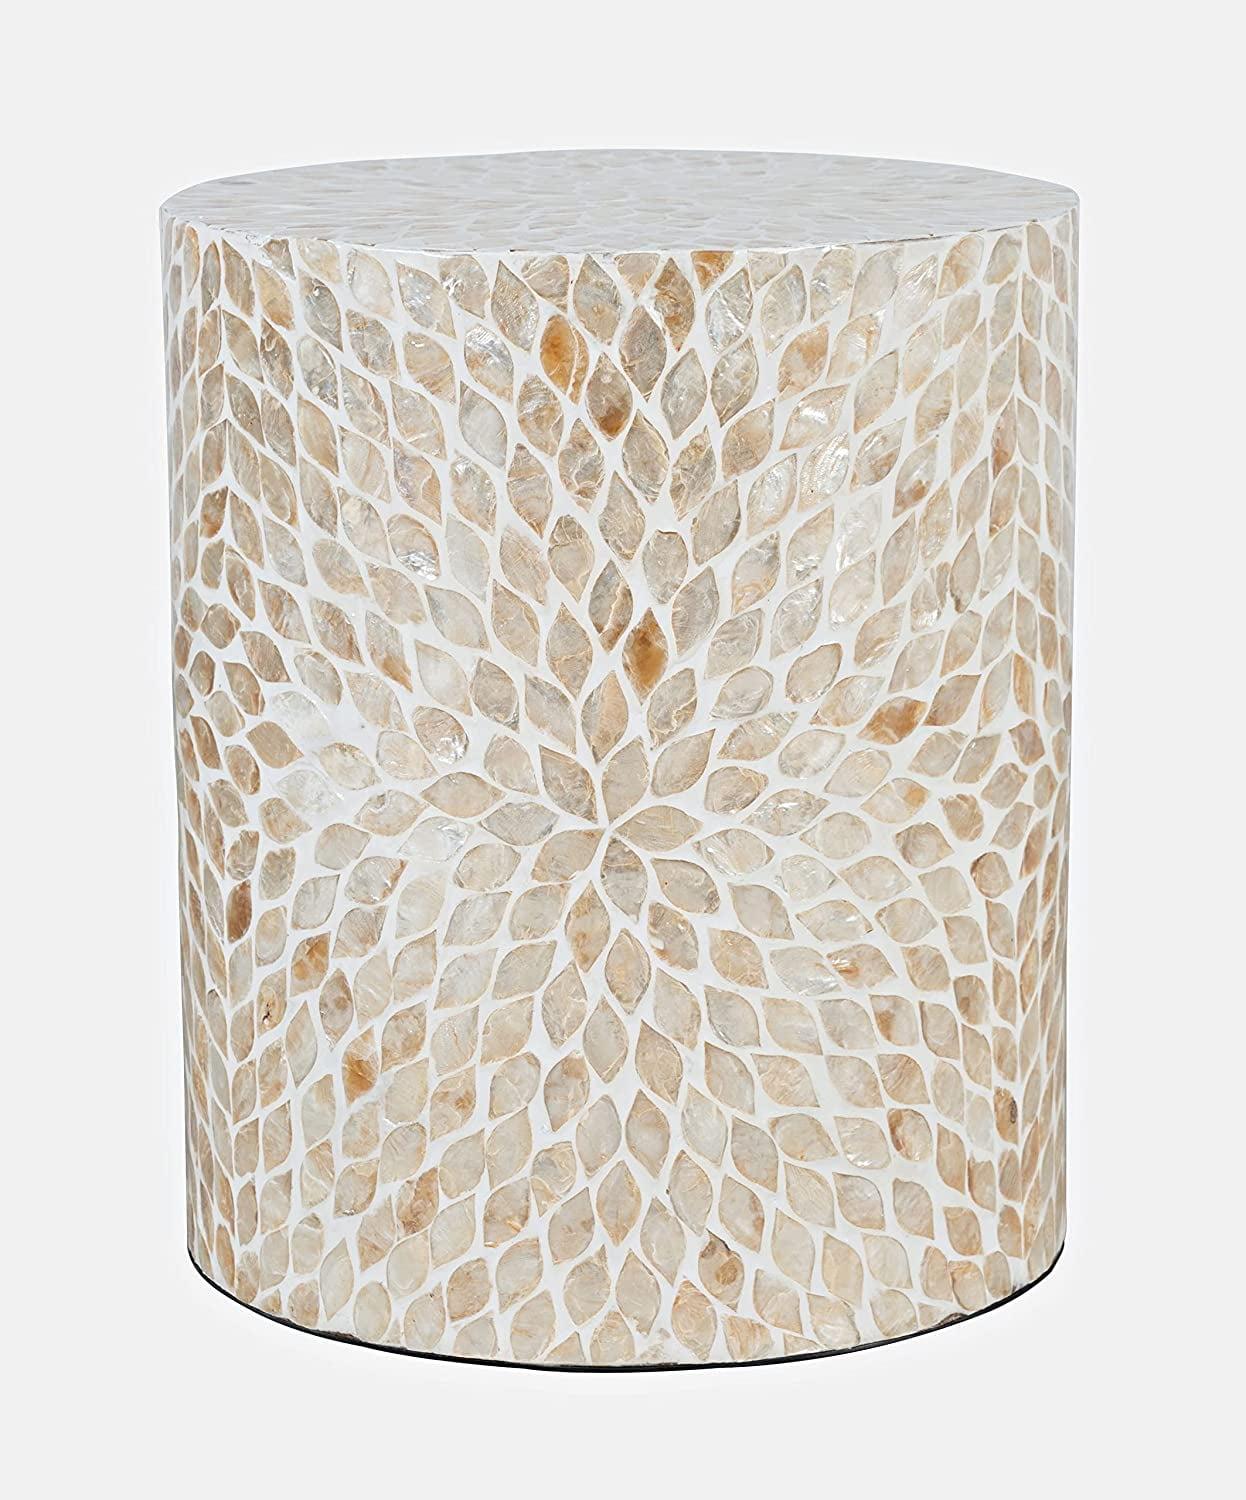 Cream Capiz Shell & Metal Transitional Round Accent Table